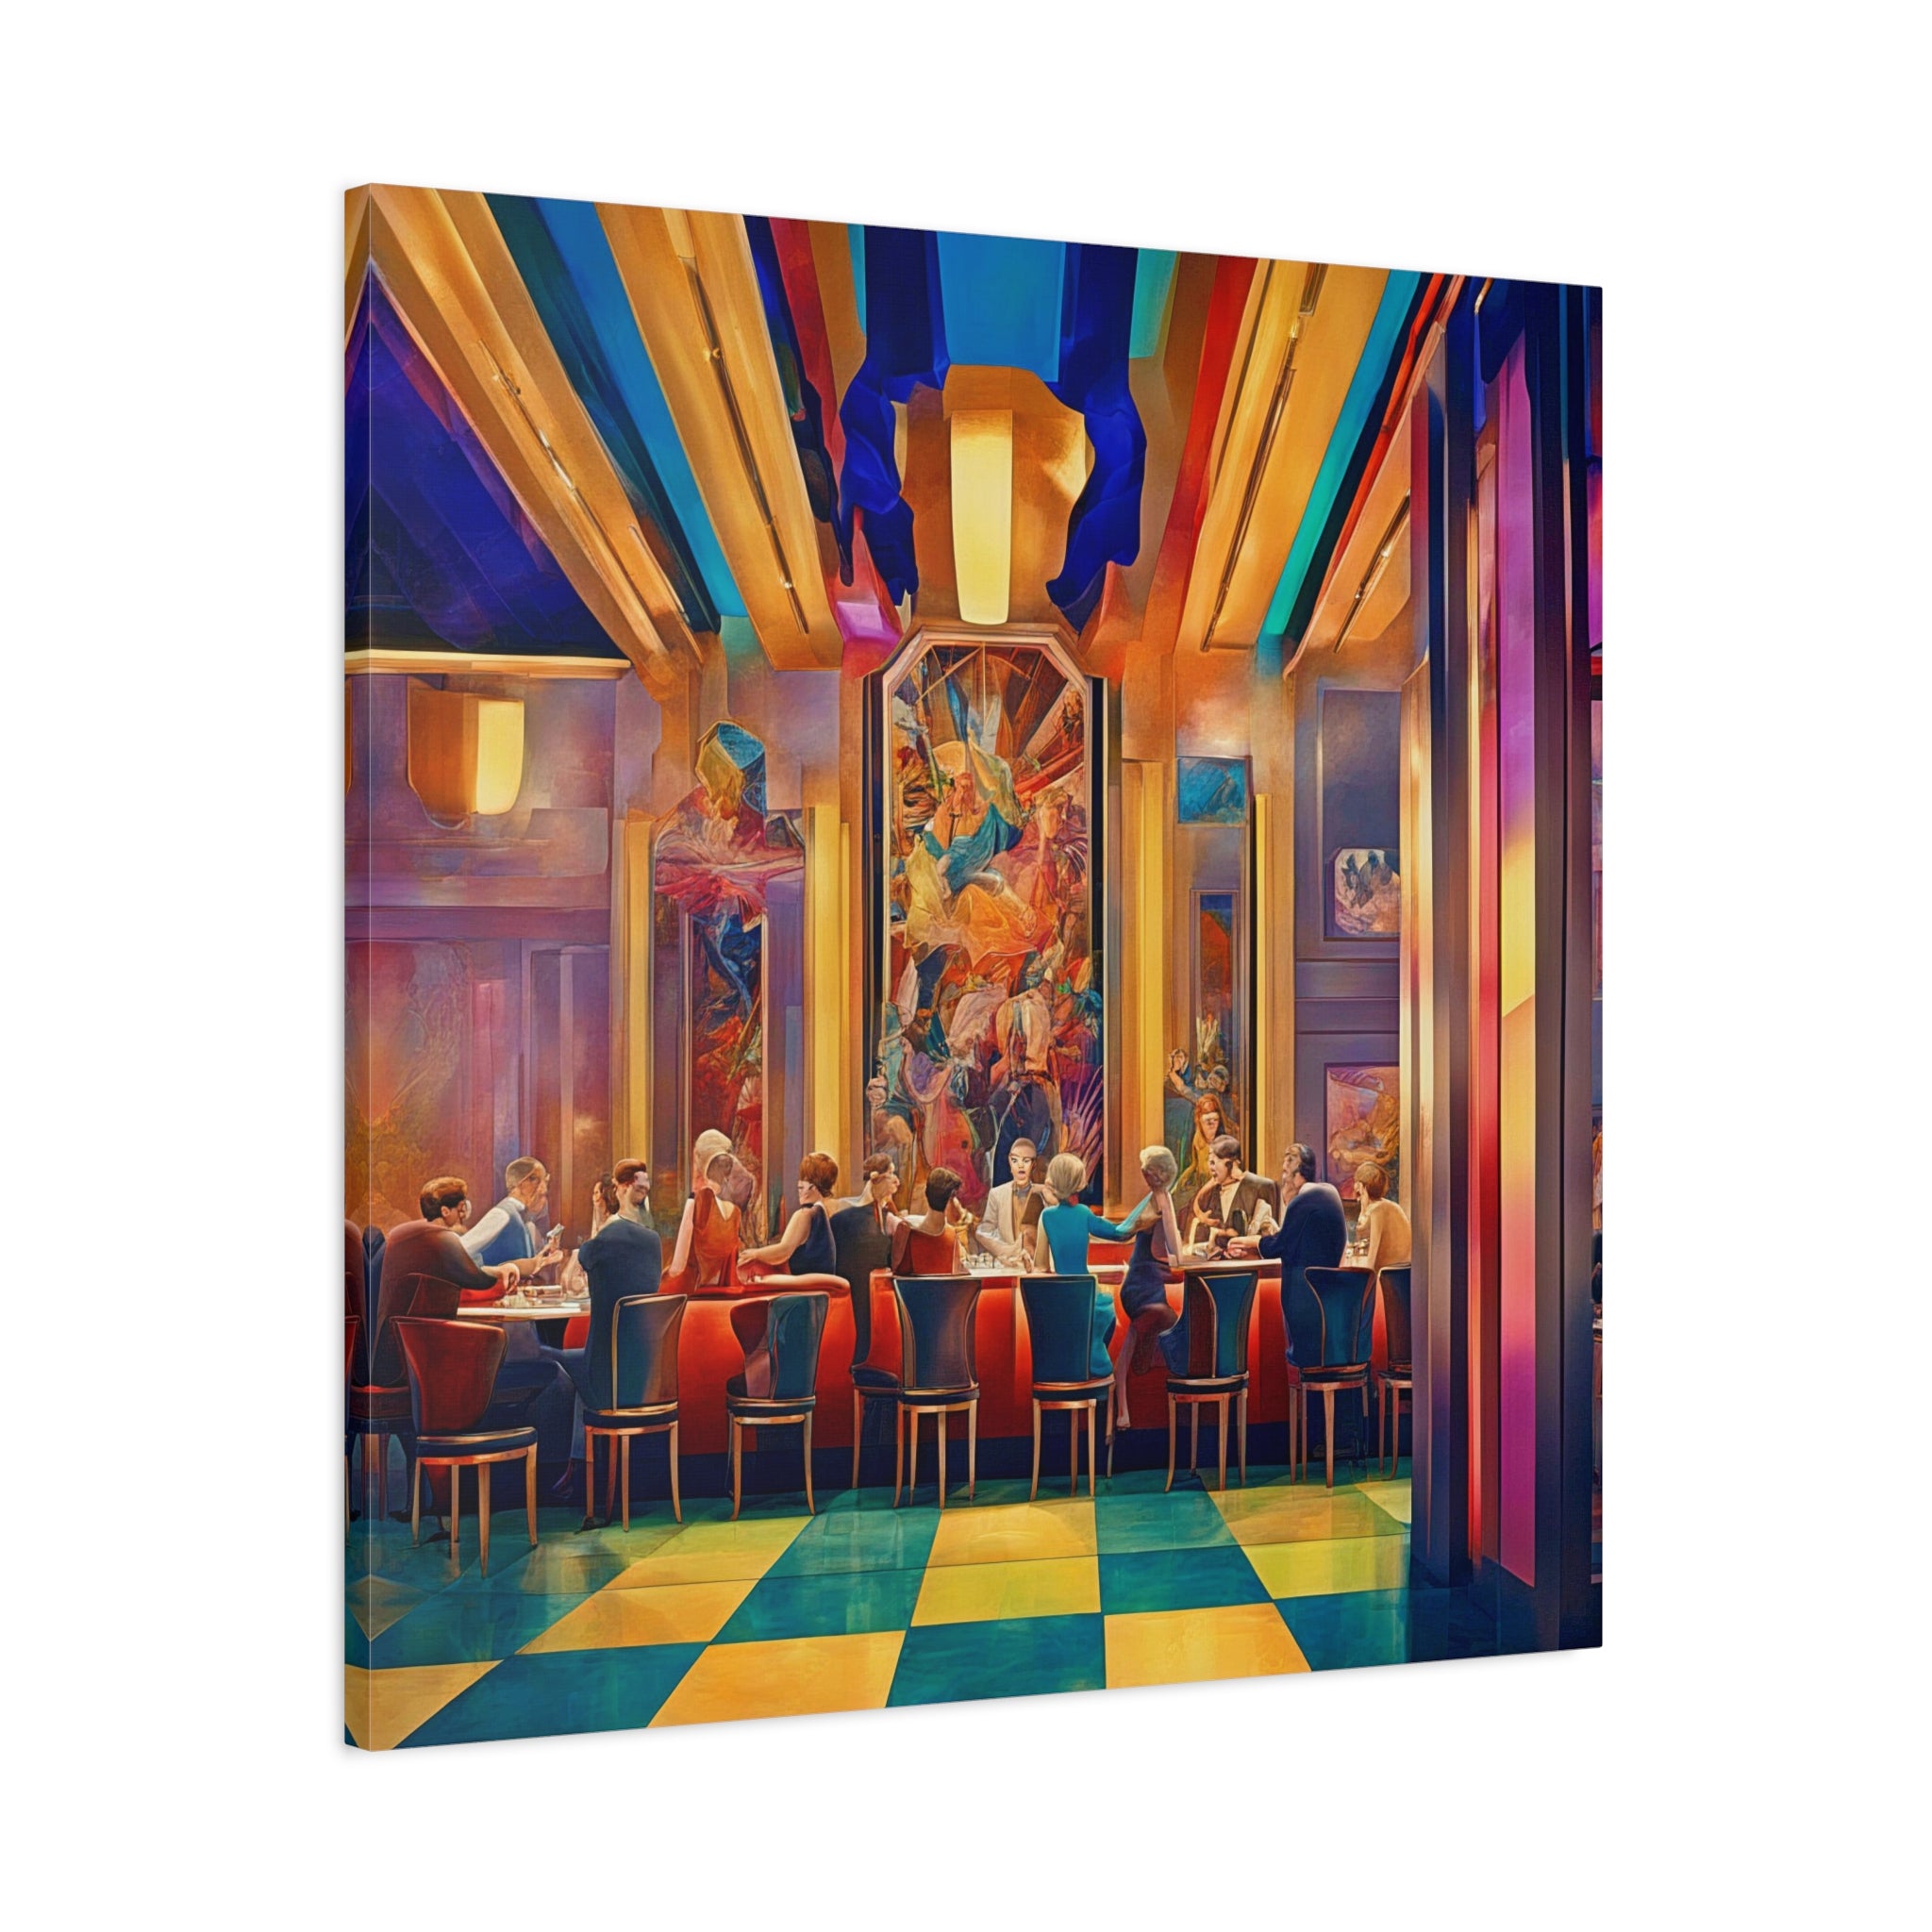 Wall Art LET'S MEET at the BAR Canvas Print Art Deco Painting Giclee 32x32 GW Love Fun Beauty Design House Decor Home Office Gift Ready Hang